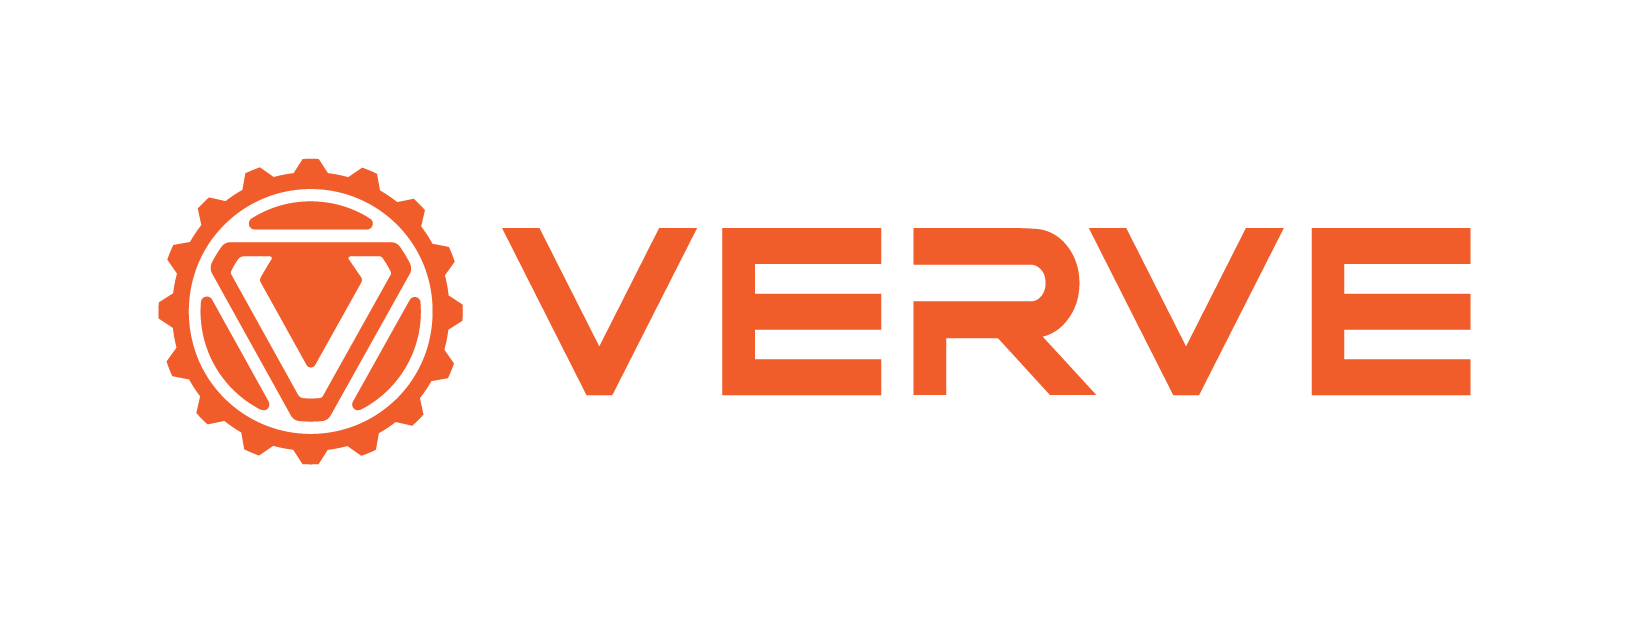 https://www.icscybersecurityconference.com/wp-content/uploads/2022/07/Verve-Logo.png